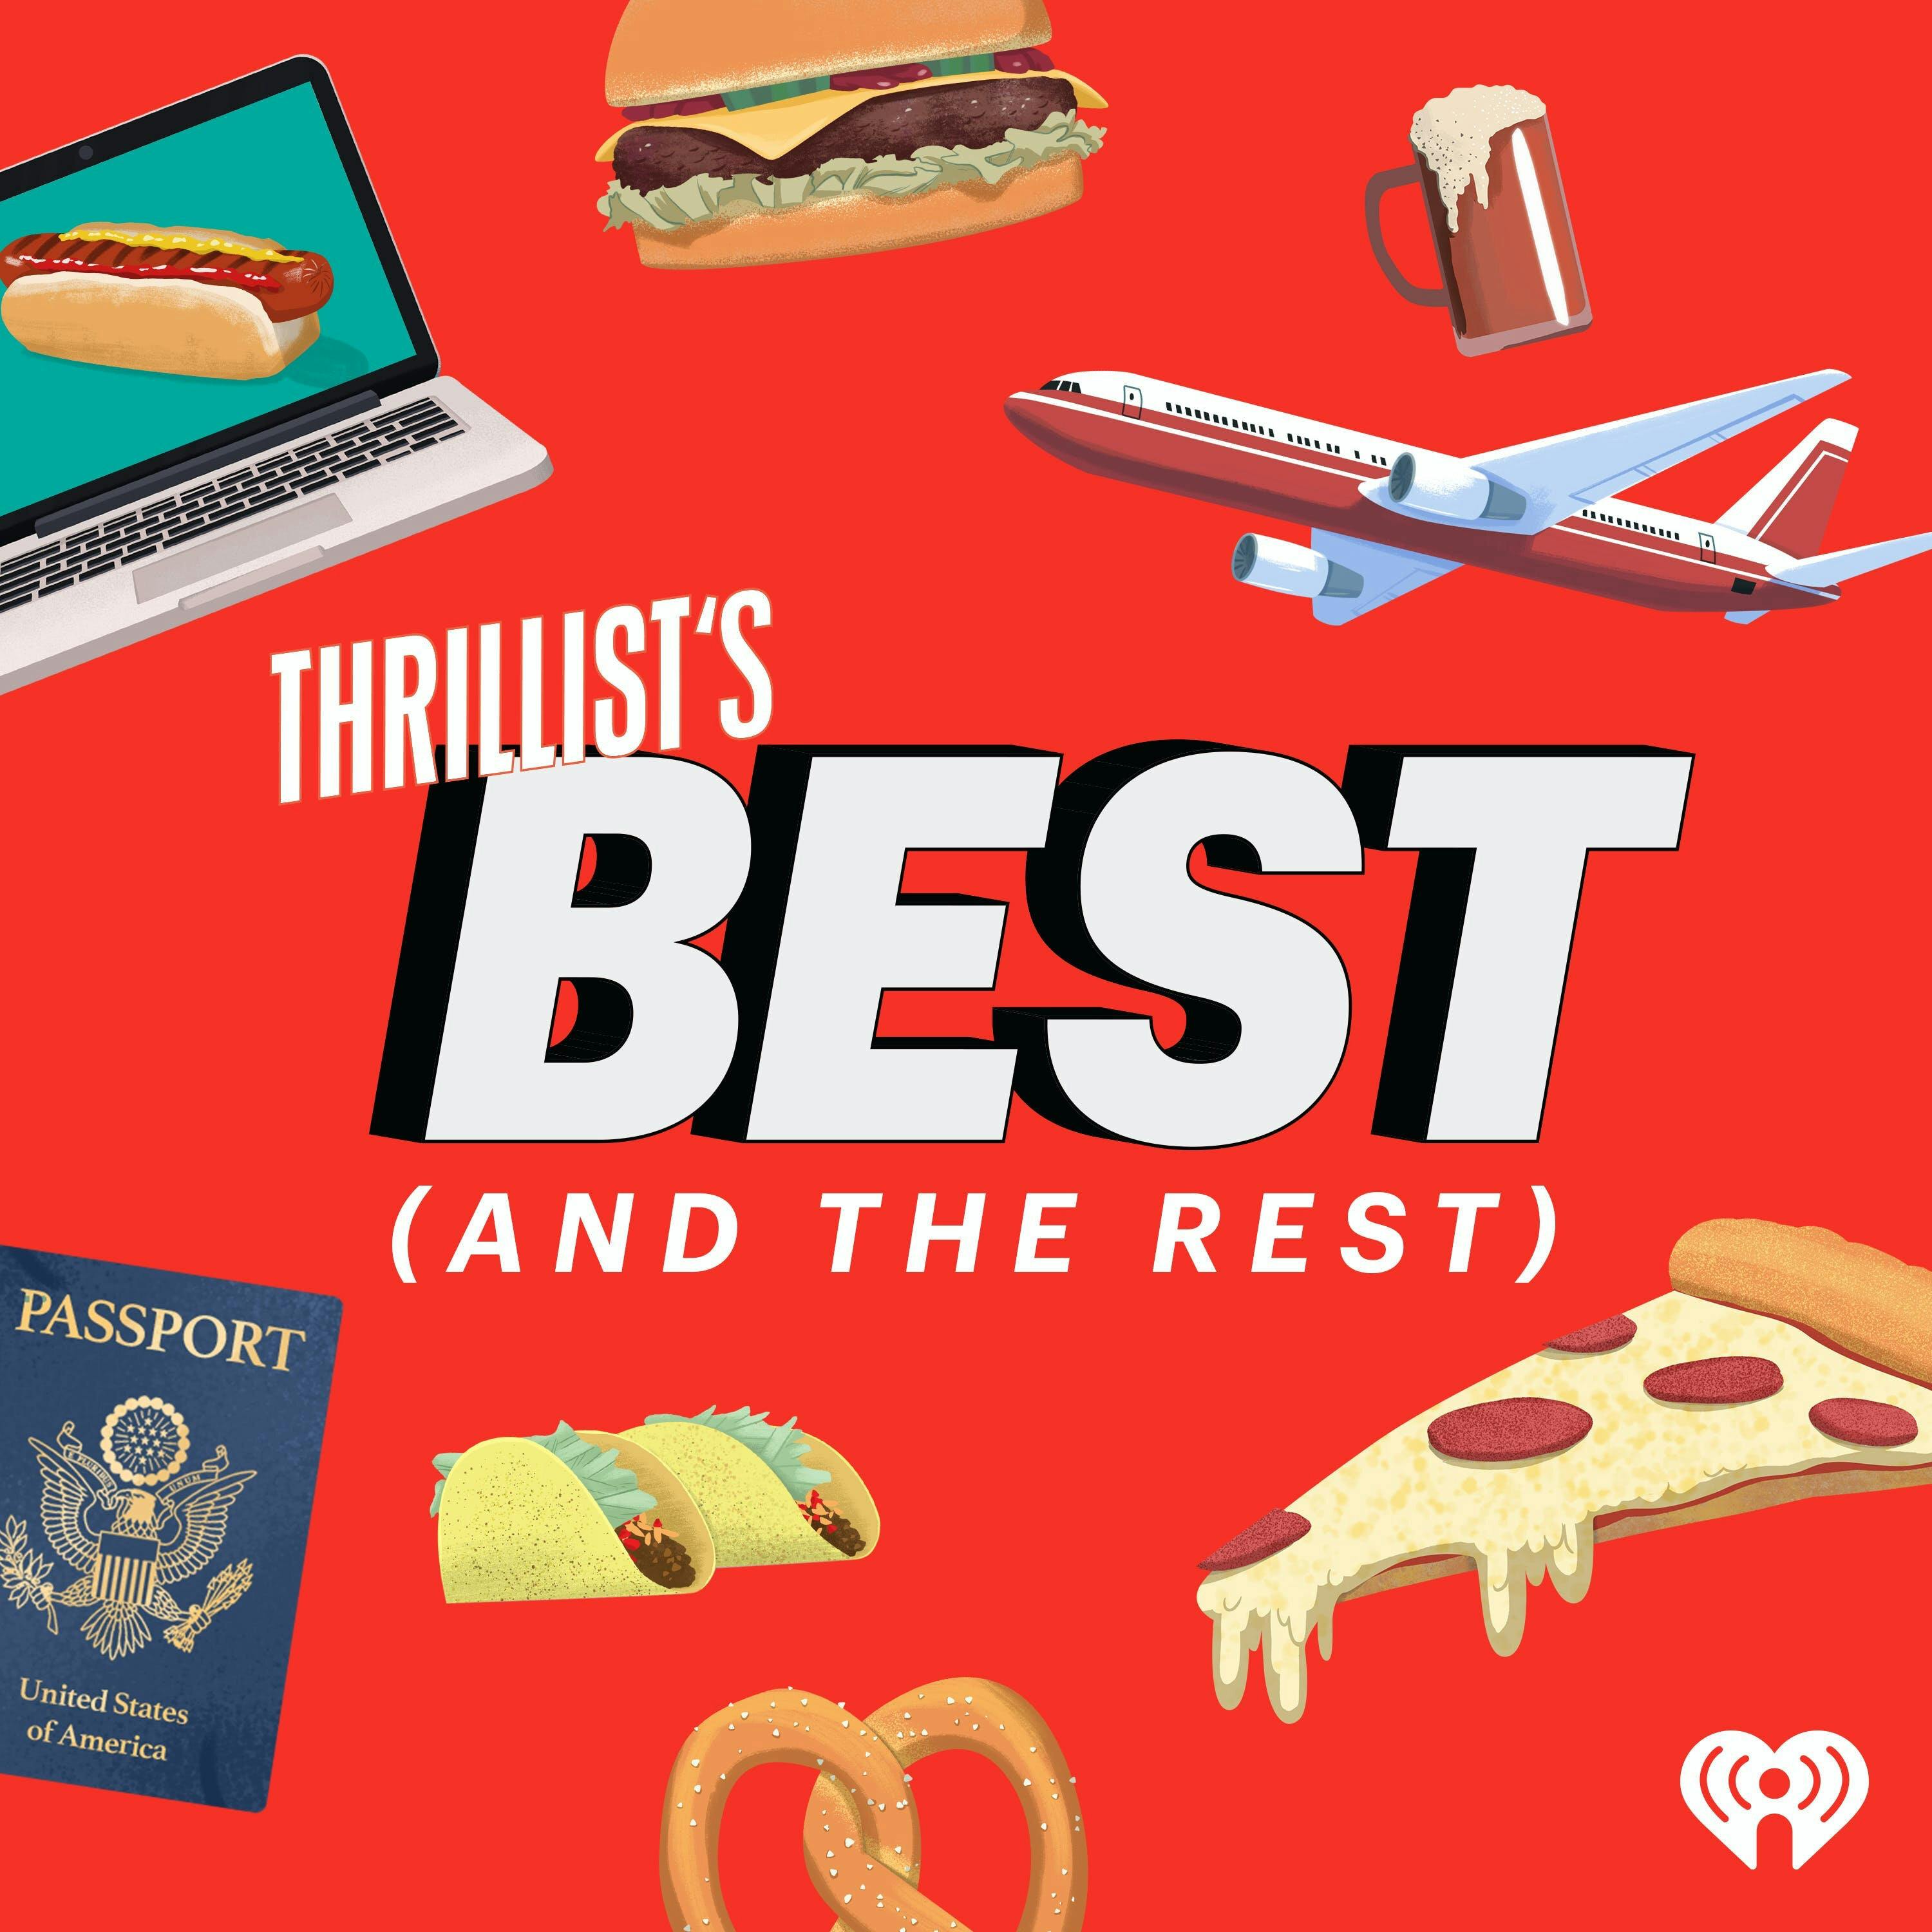 THRILLIST’S BEST: How to Travel Like an Expert (and the Mistakes You Don’t Want to Make)